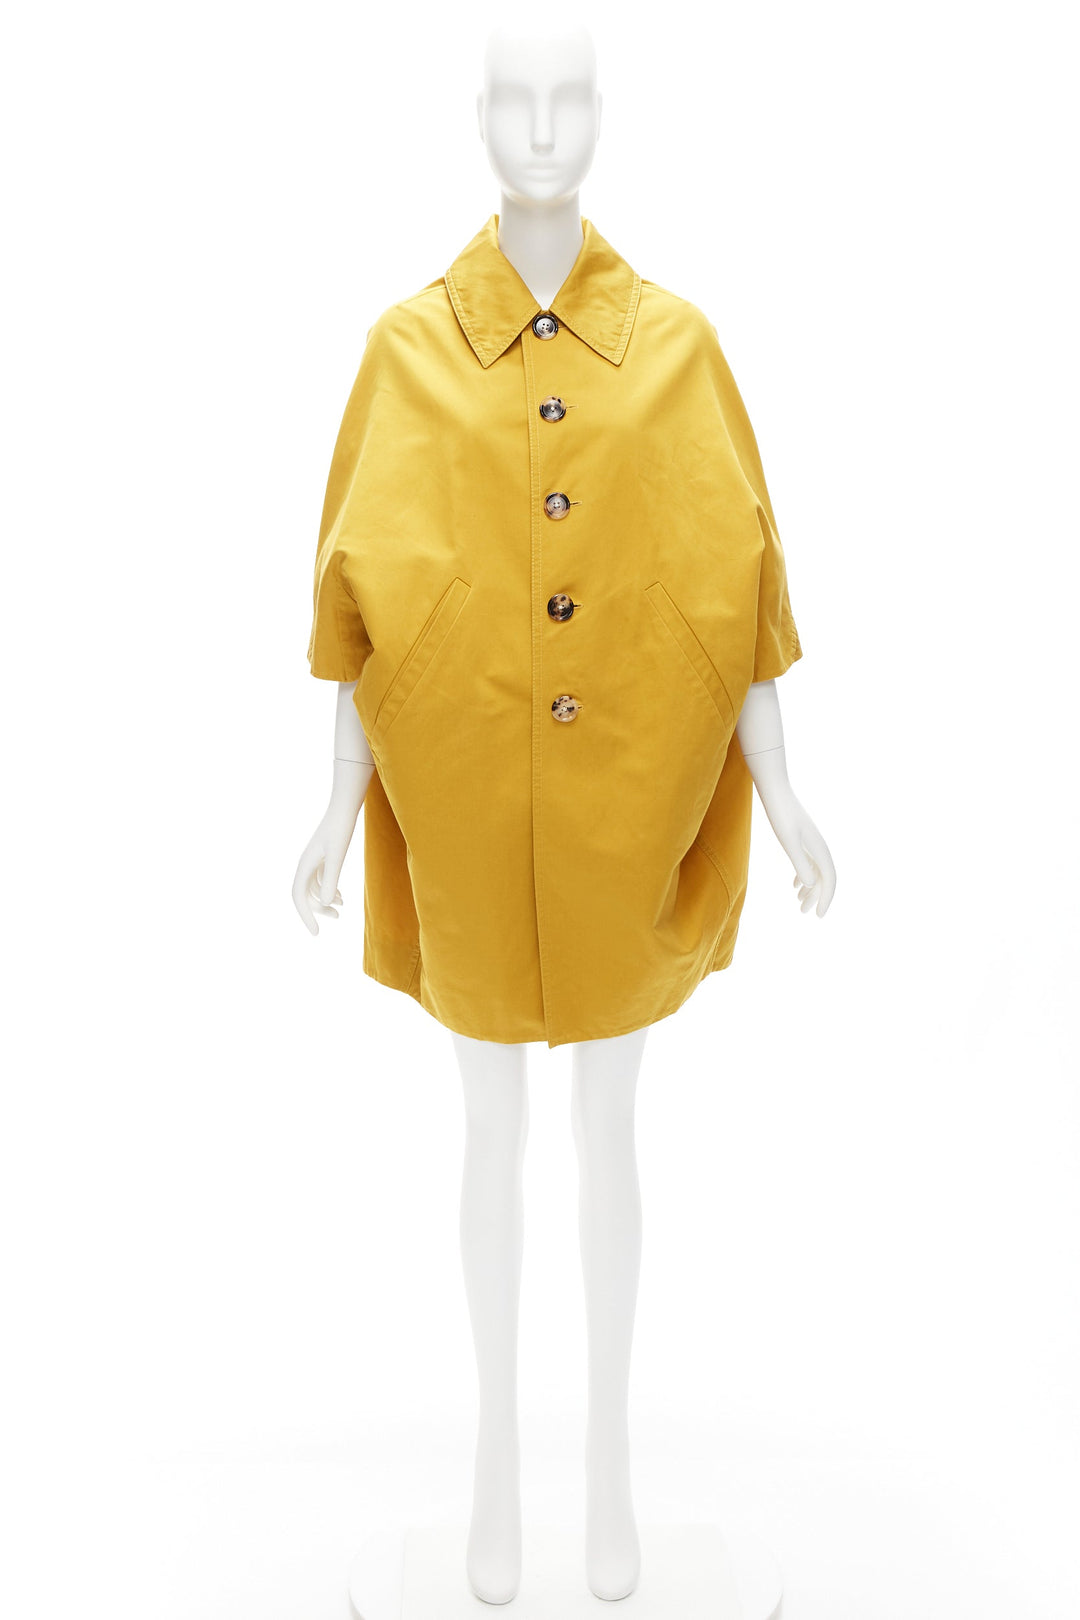 MARNI mustard yellow cotton linen cocoon cropped sleeves coat IT36 XS